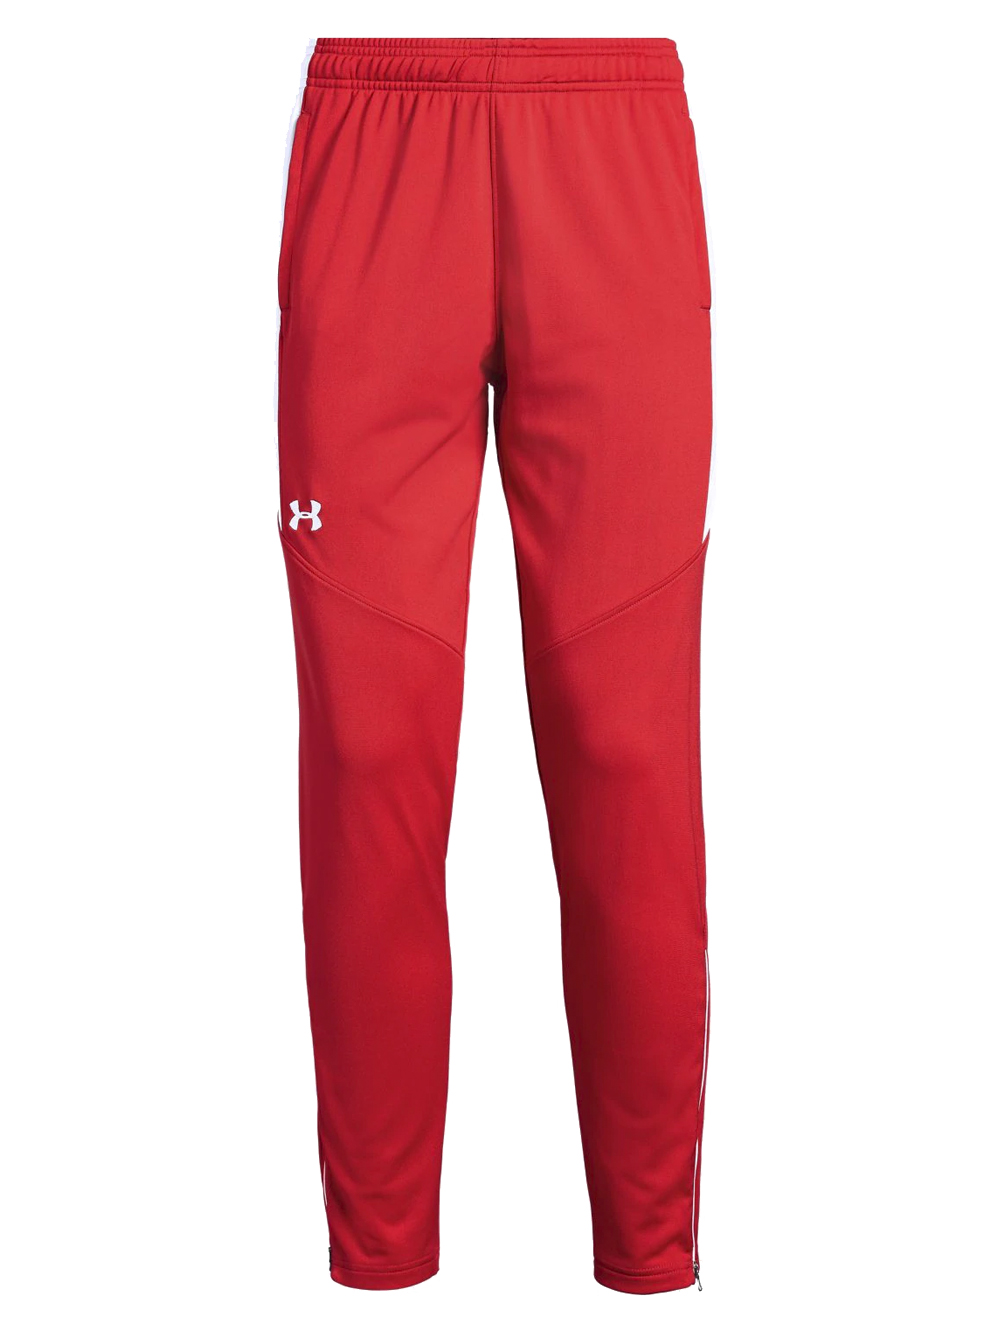 Under Armour Rival Knit Pants